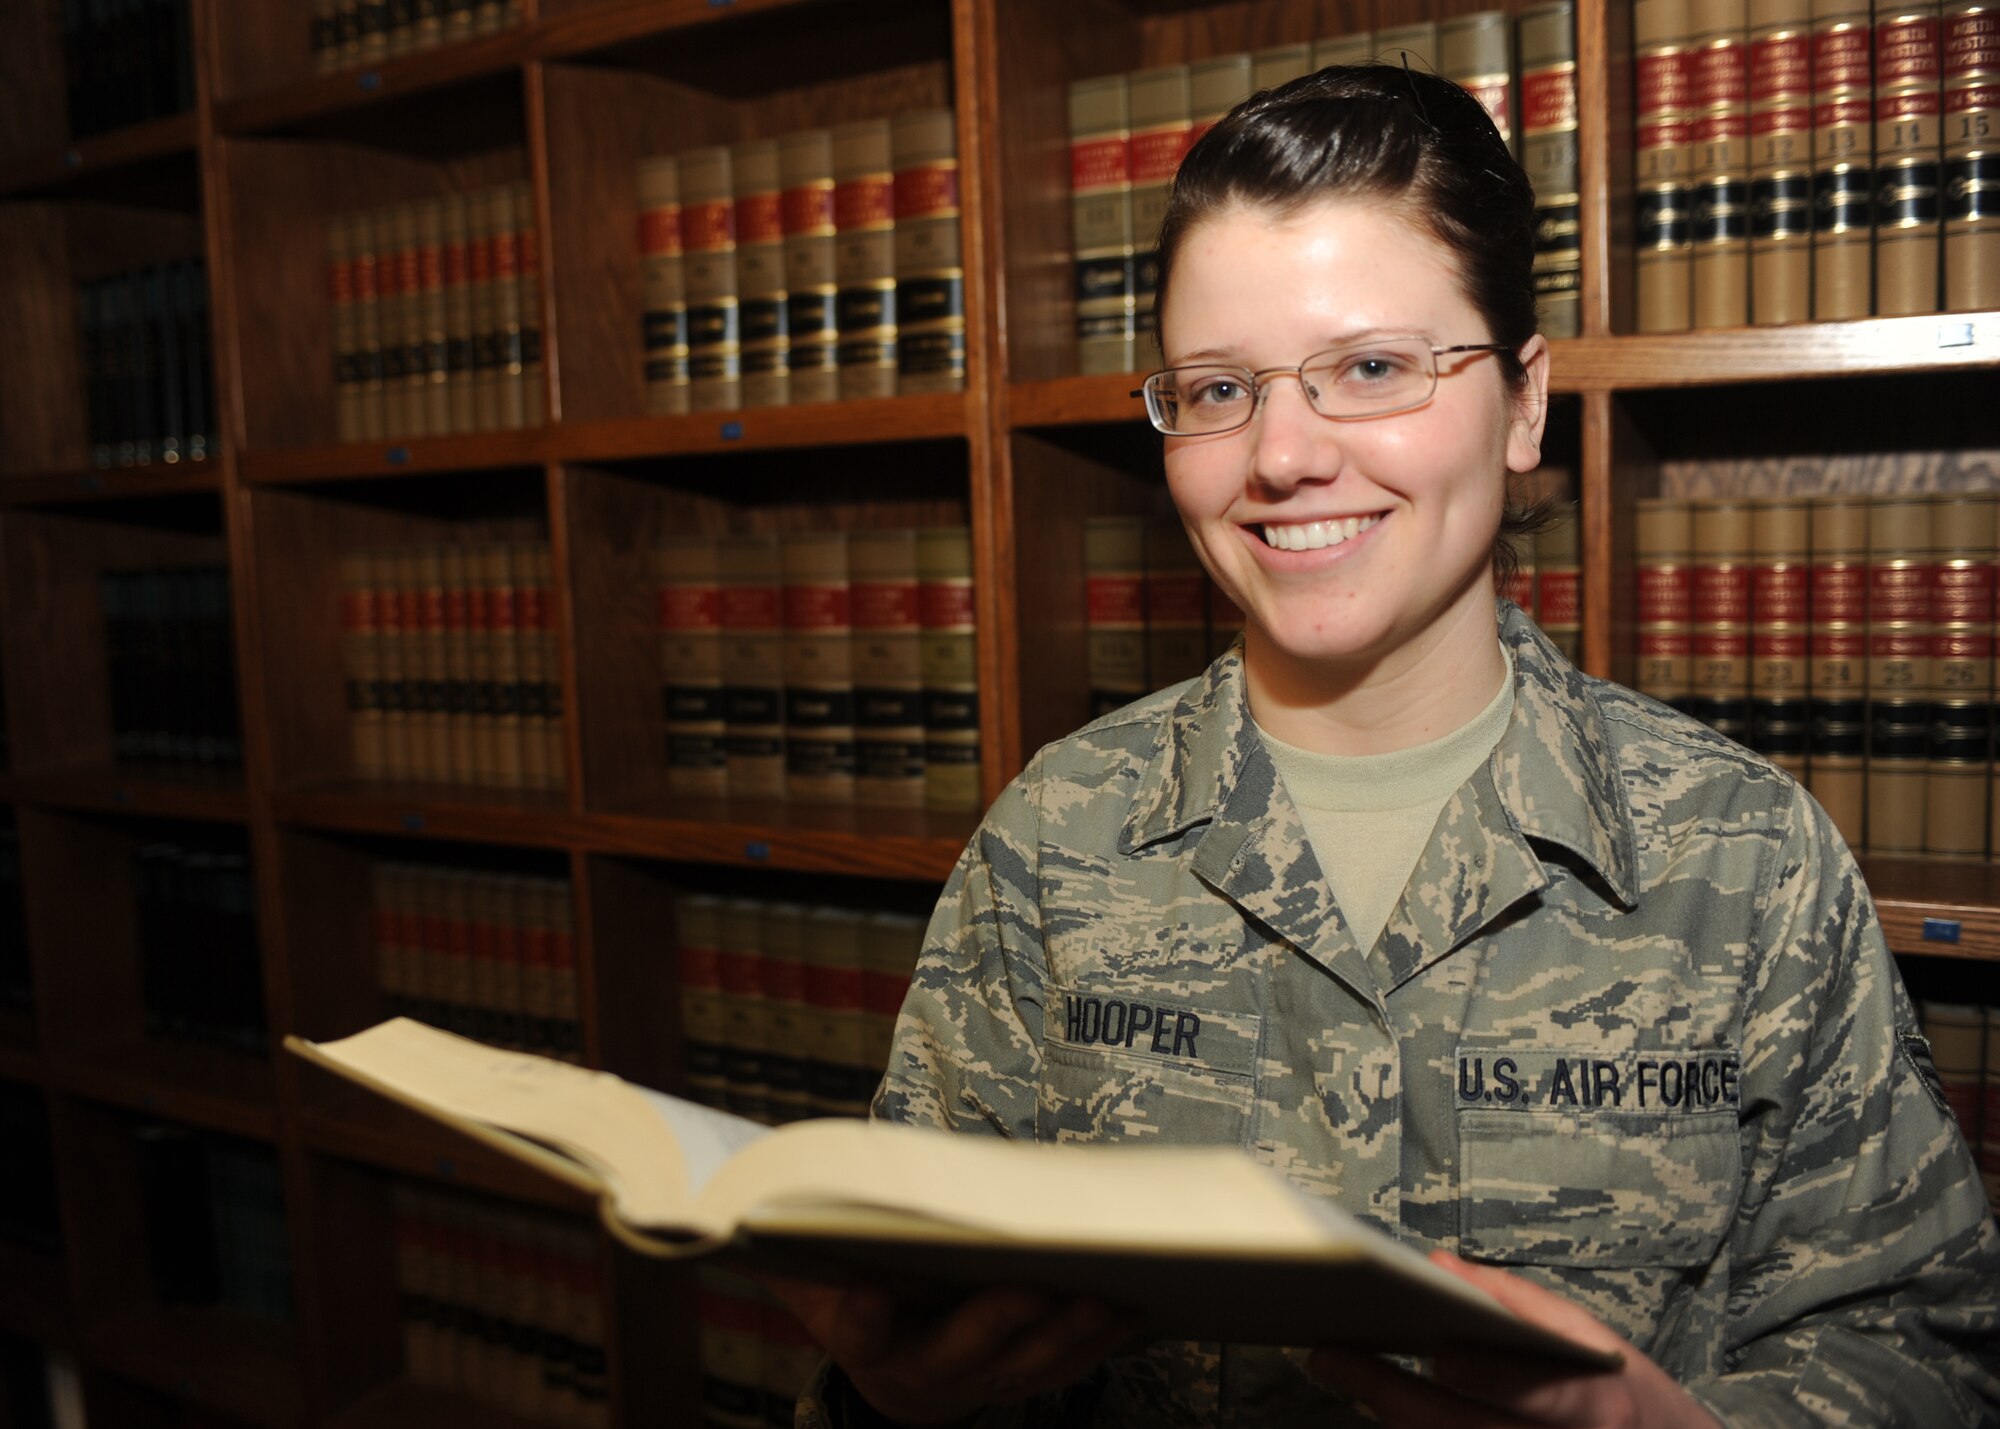 MINOT AIR FORCE BASE, N.D. -- Senior Airman Krystal Hooper, 5th Bomb Wing paralegal, was recently selected as the 8th Air Force Outstanding Paralegal Airman of the Year. The award is based on demonstrated superior initiative, technical skill, leadership ability and devotion to duty and is among the highest distinctions an Air Force paralegal can receive and recognizes Airmen in the grade of technical sergeant and below. (U.S. Air Force photo by Airman 1st Class Aaron-Forrest Wainright)